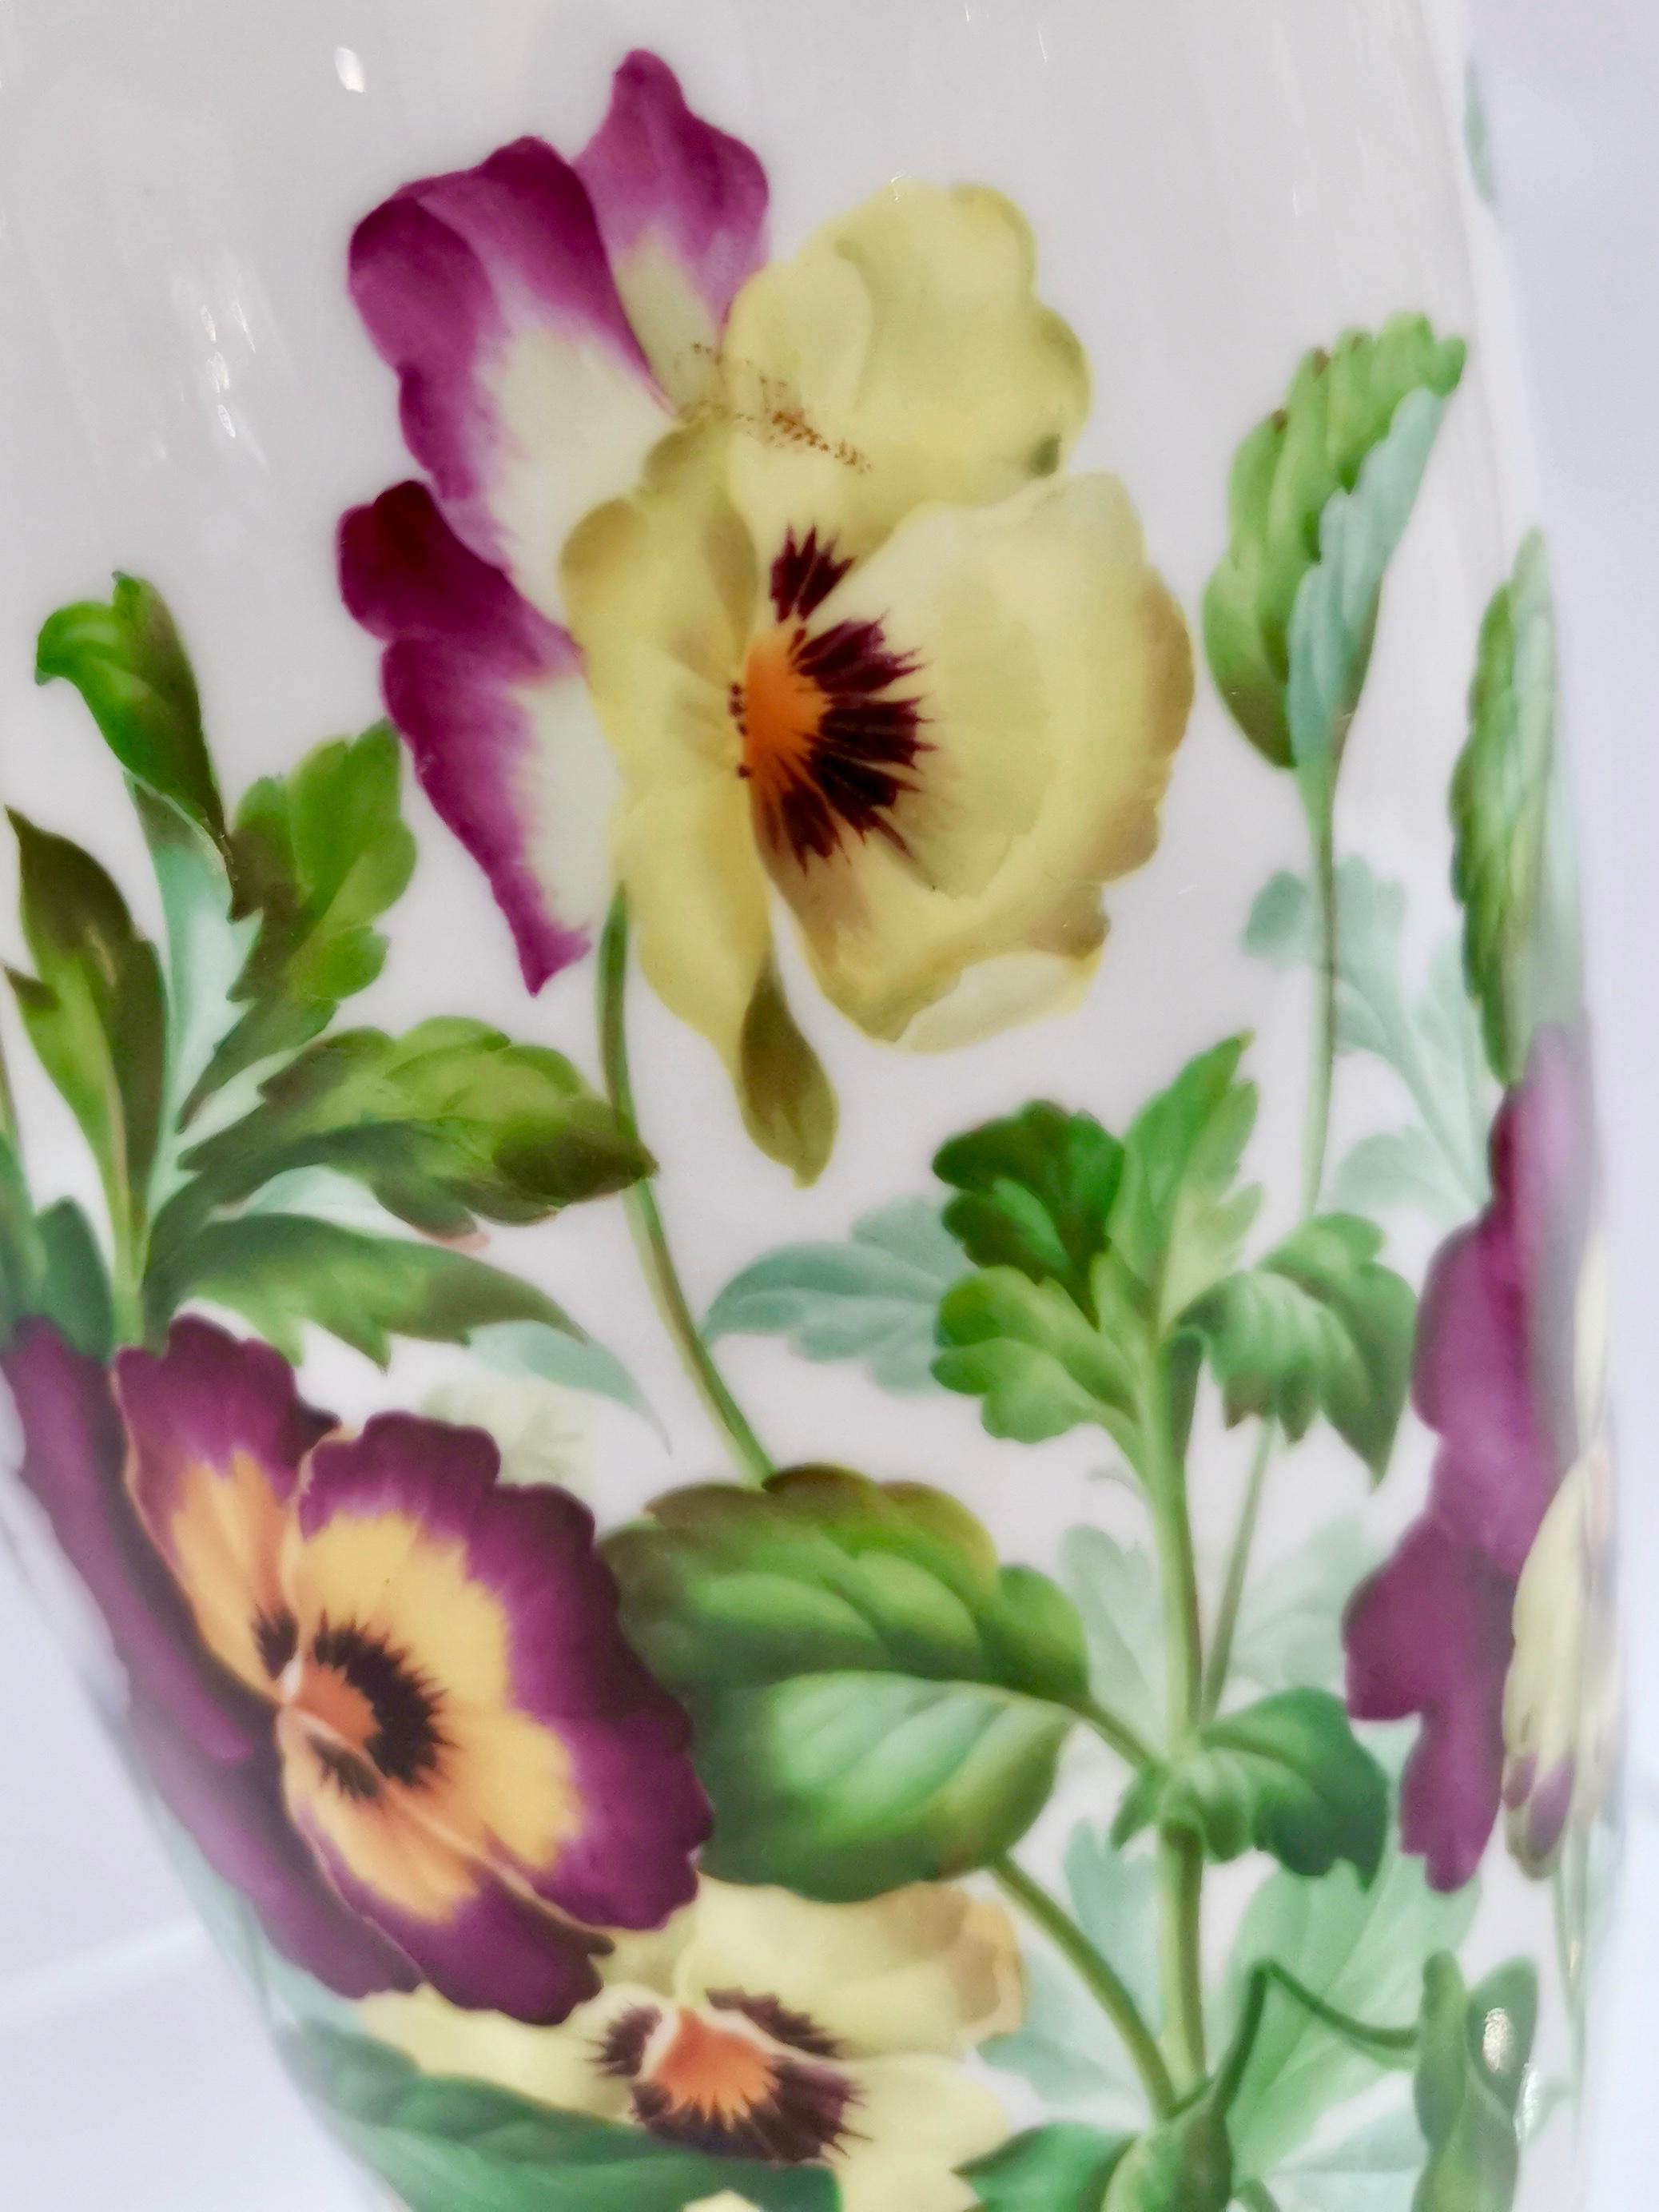 Mid-19th Century Minton Pair of Porcelain Vases, Pansies Painted by Jesse Smith, Victorian, 1853